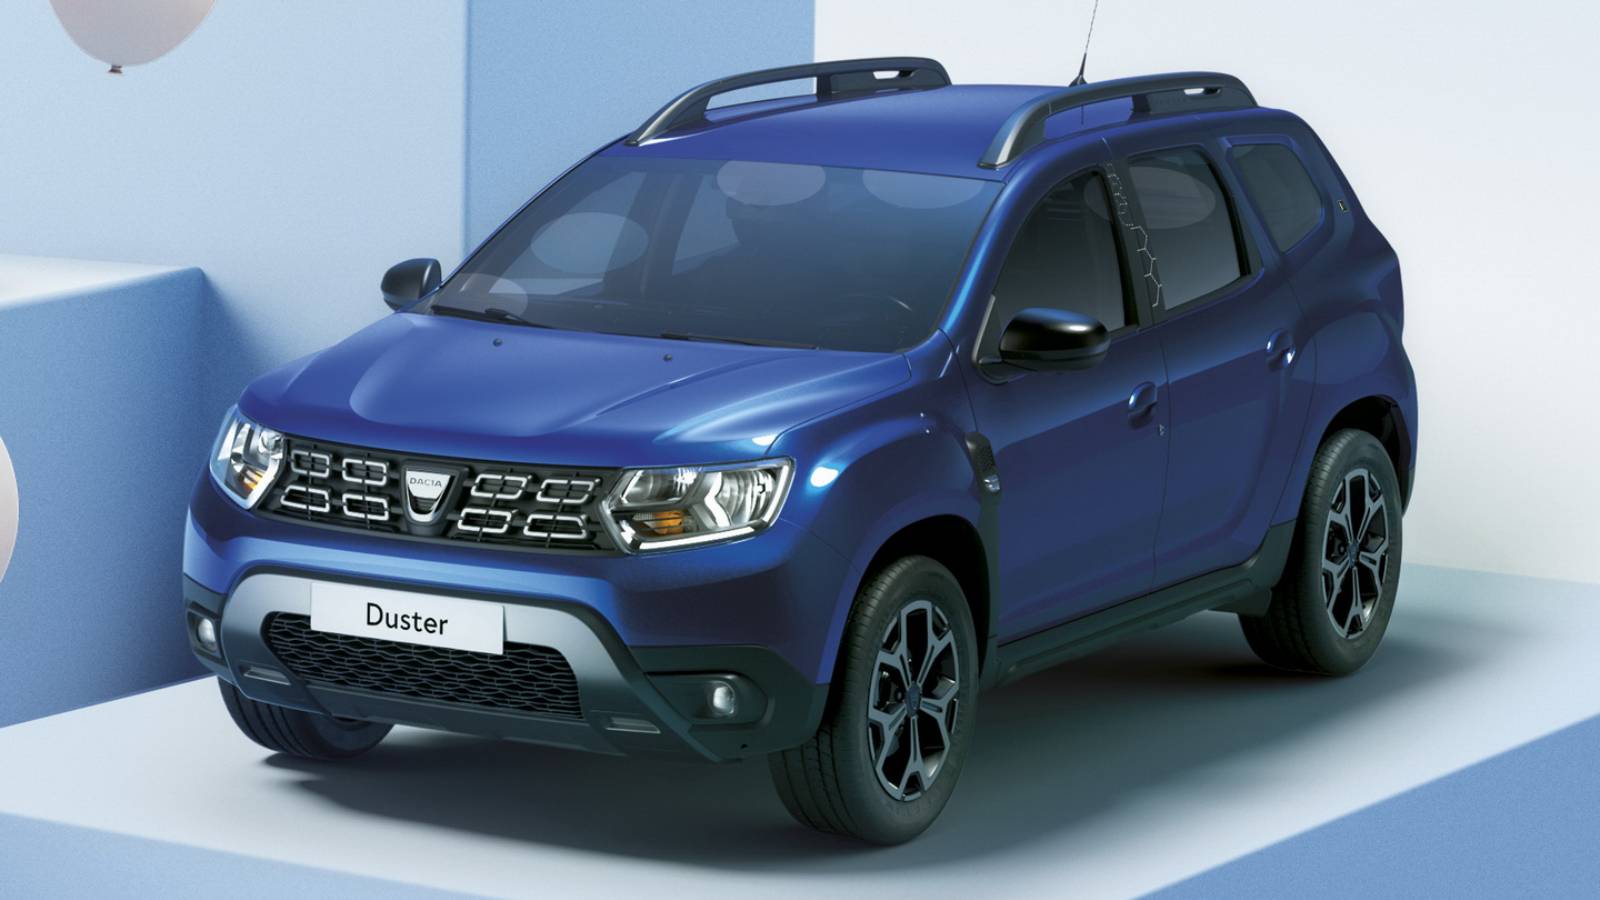 DACIA Duster engines